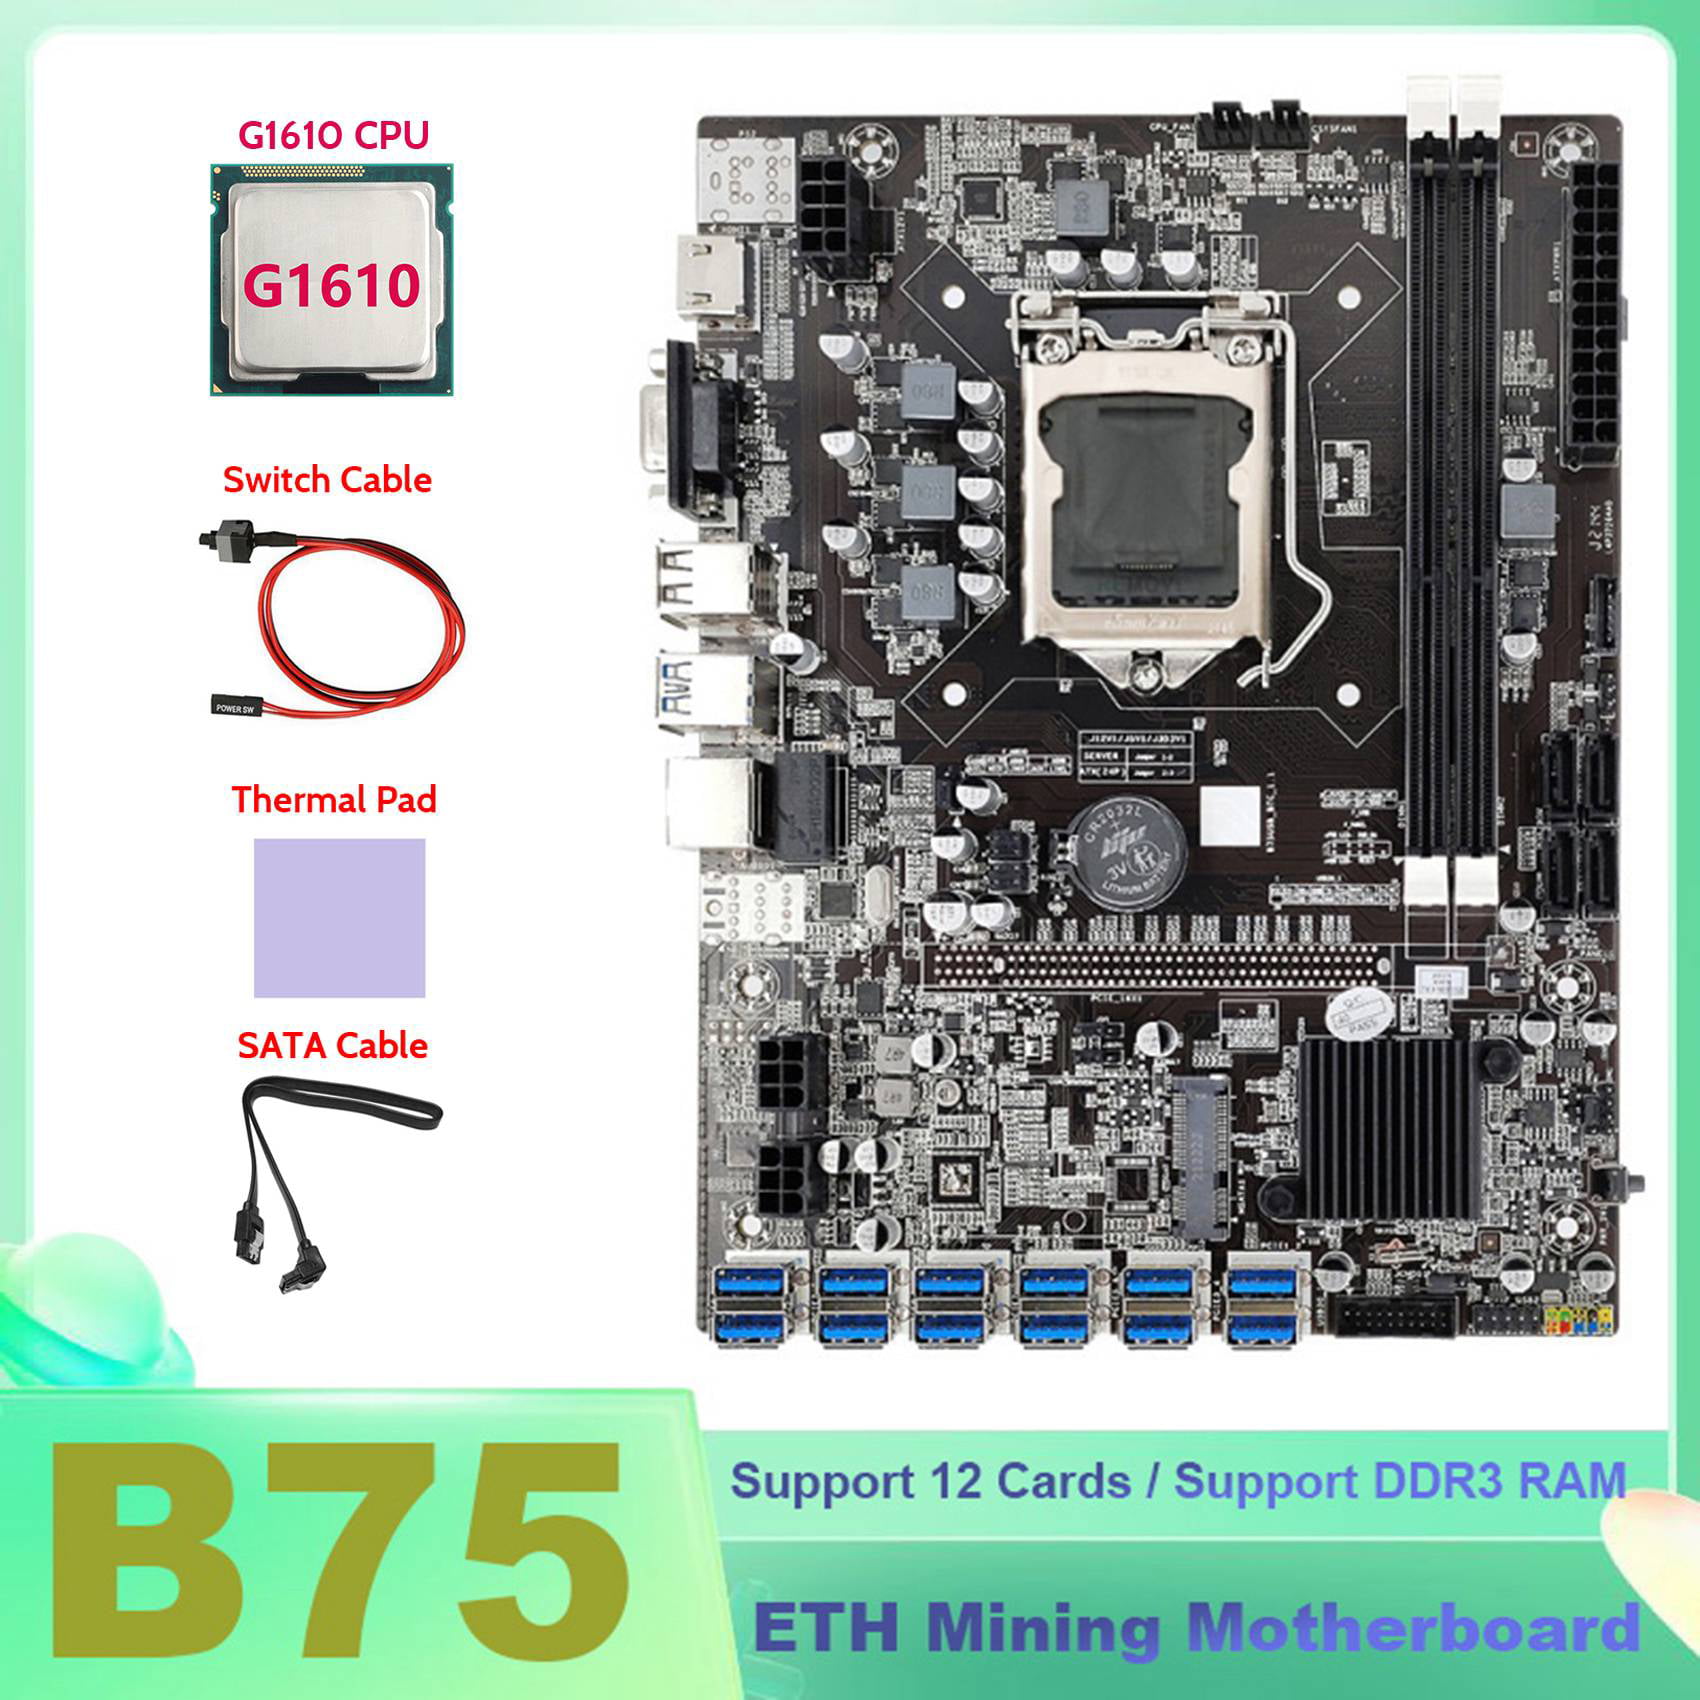 Circle Y B75 ETH Mining Motherboard 12 PCIE to USB3.0+G1610 CPU+Screwdriver Set A115 S1Y3 4894909079849 